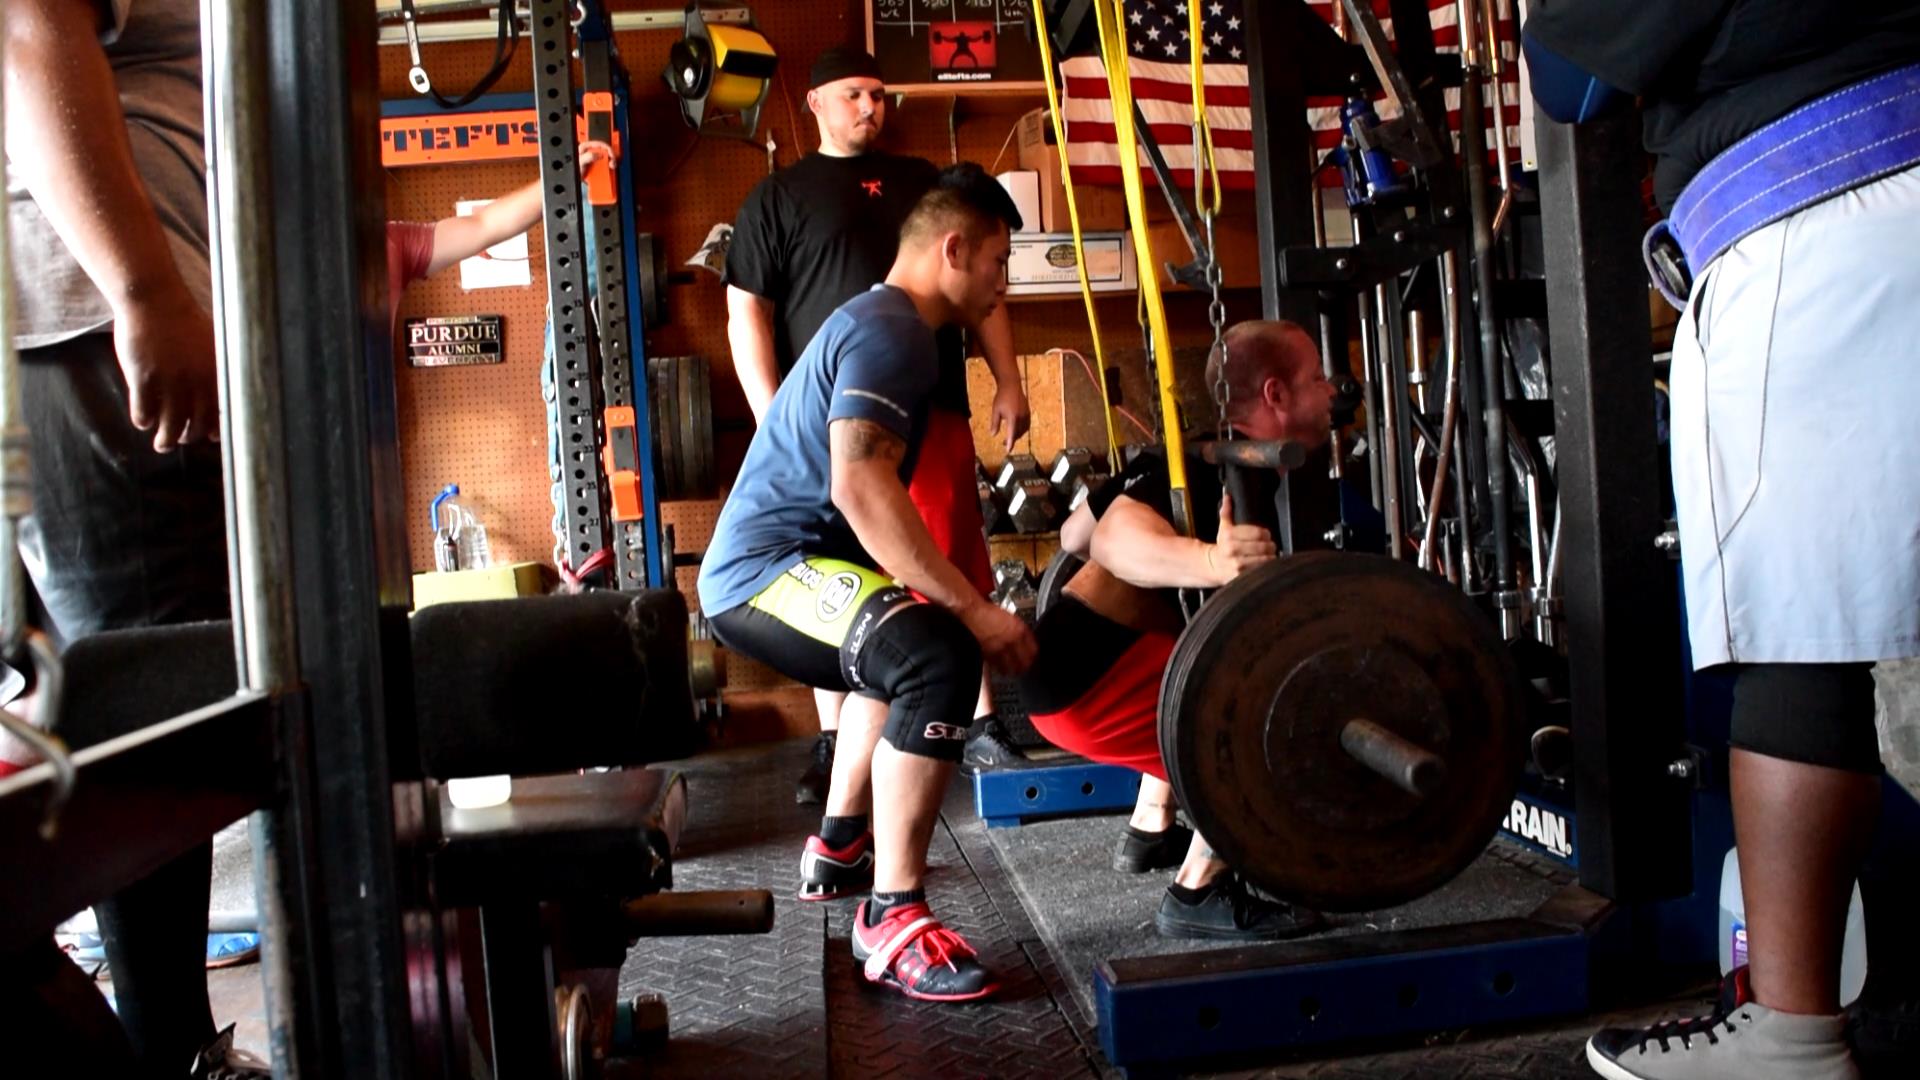 Dynamic Effort Lower: Speed Squats and Some Heavy Tuggin'